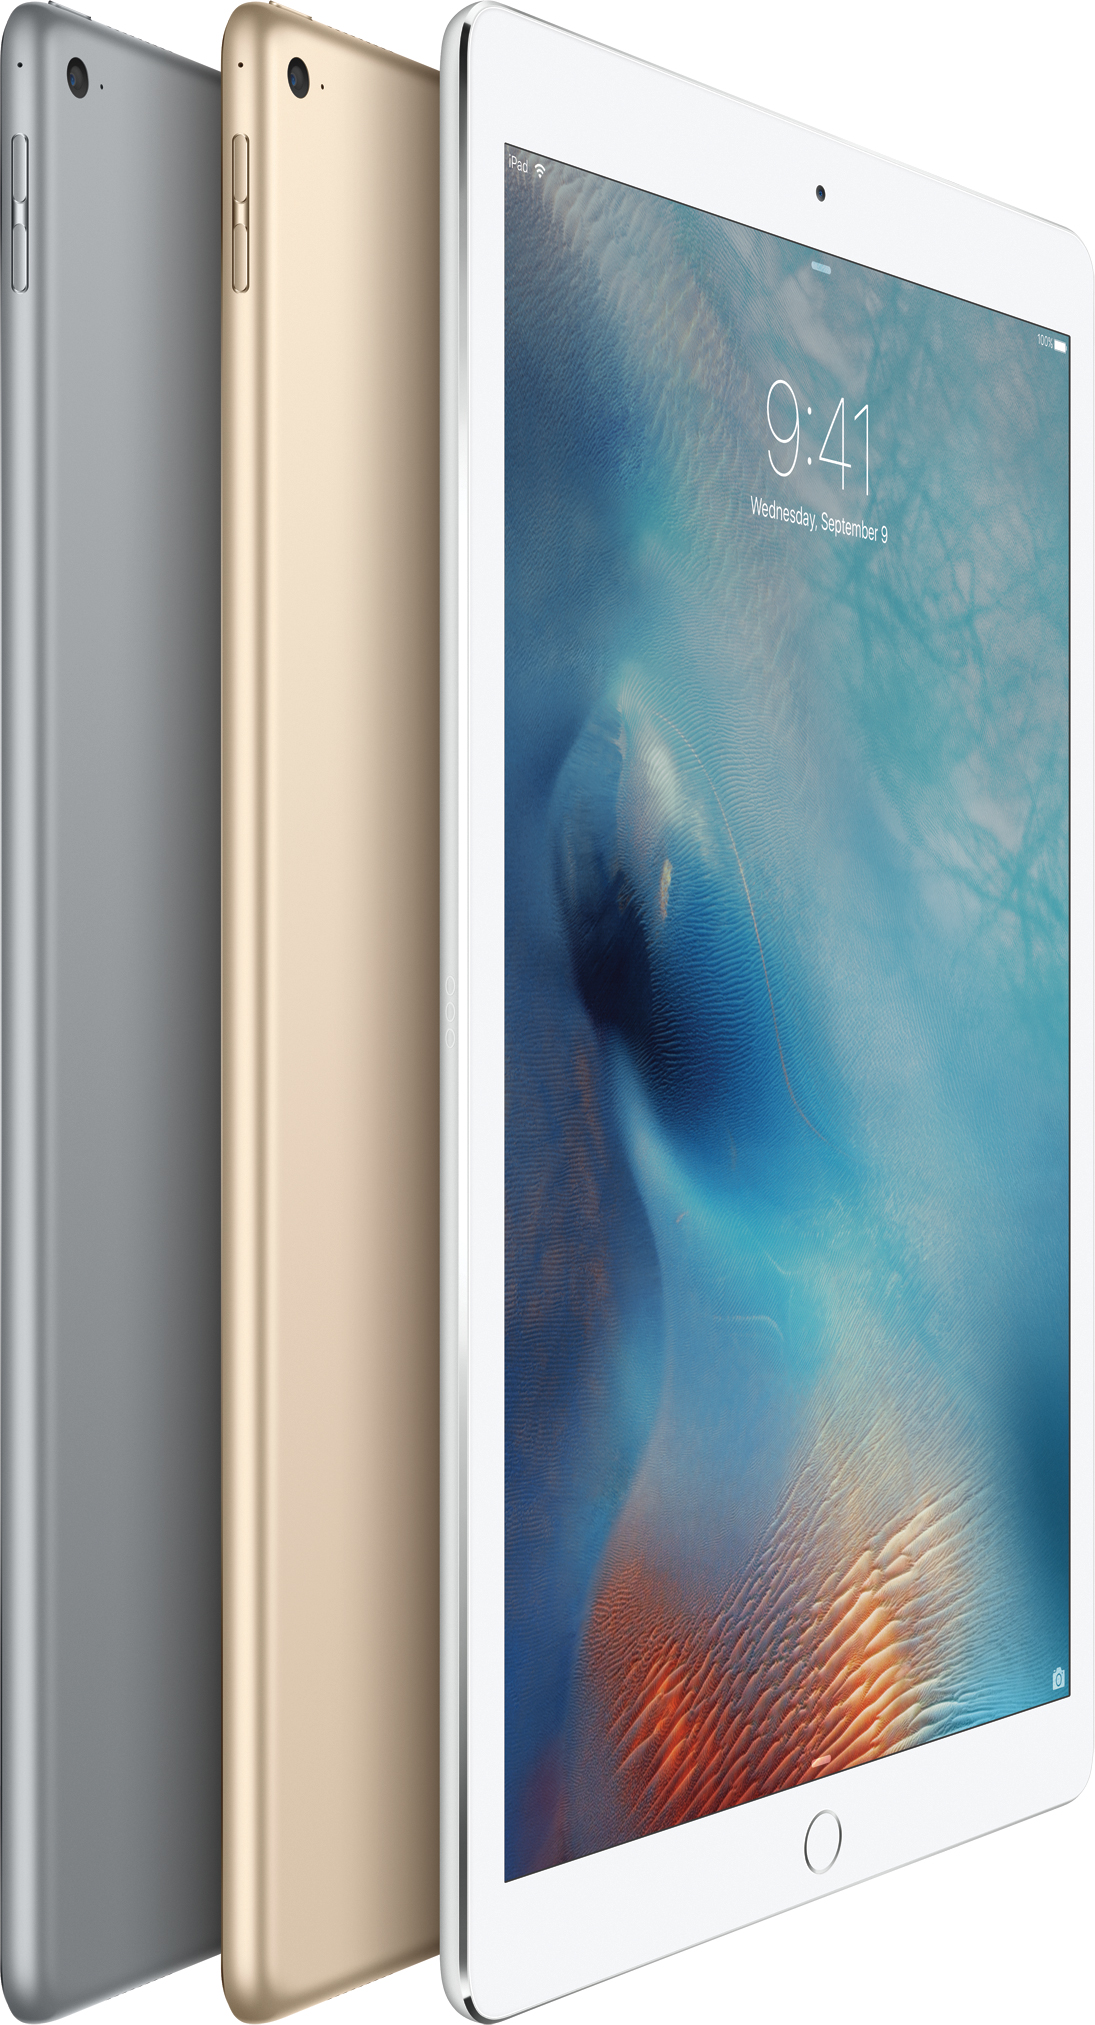 IPad Pro colors - space gray, gold and silver